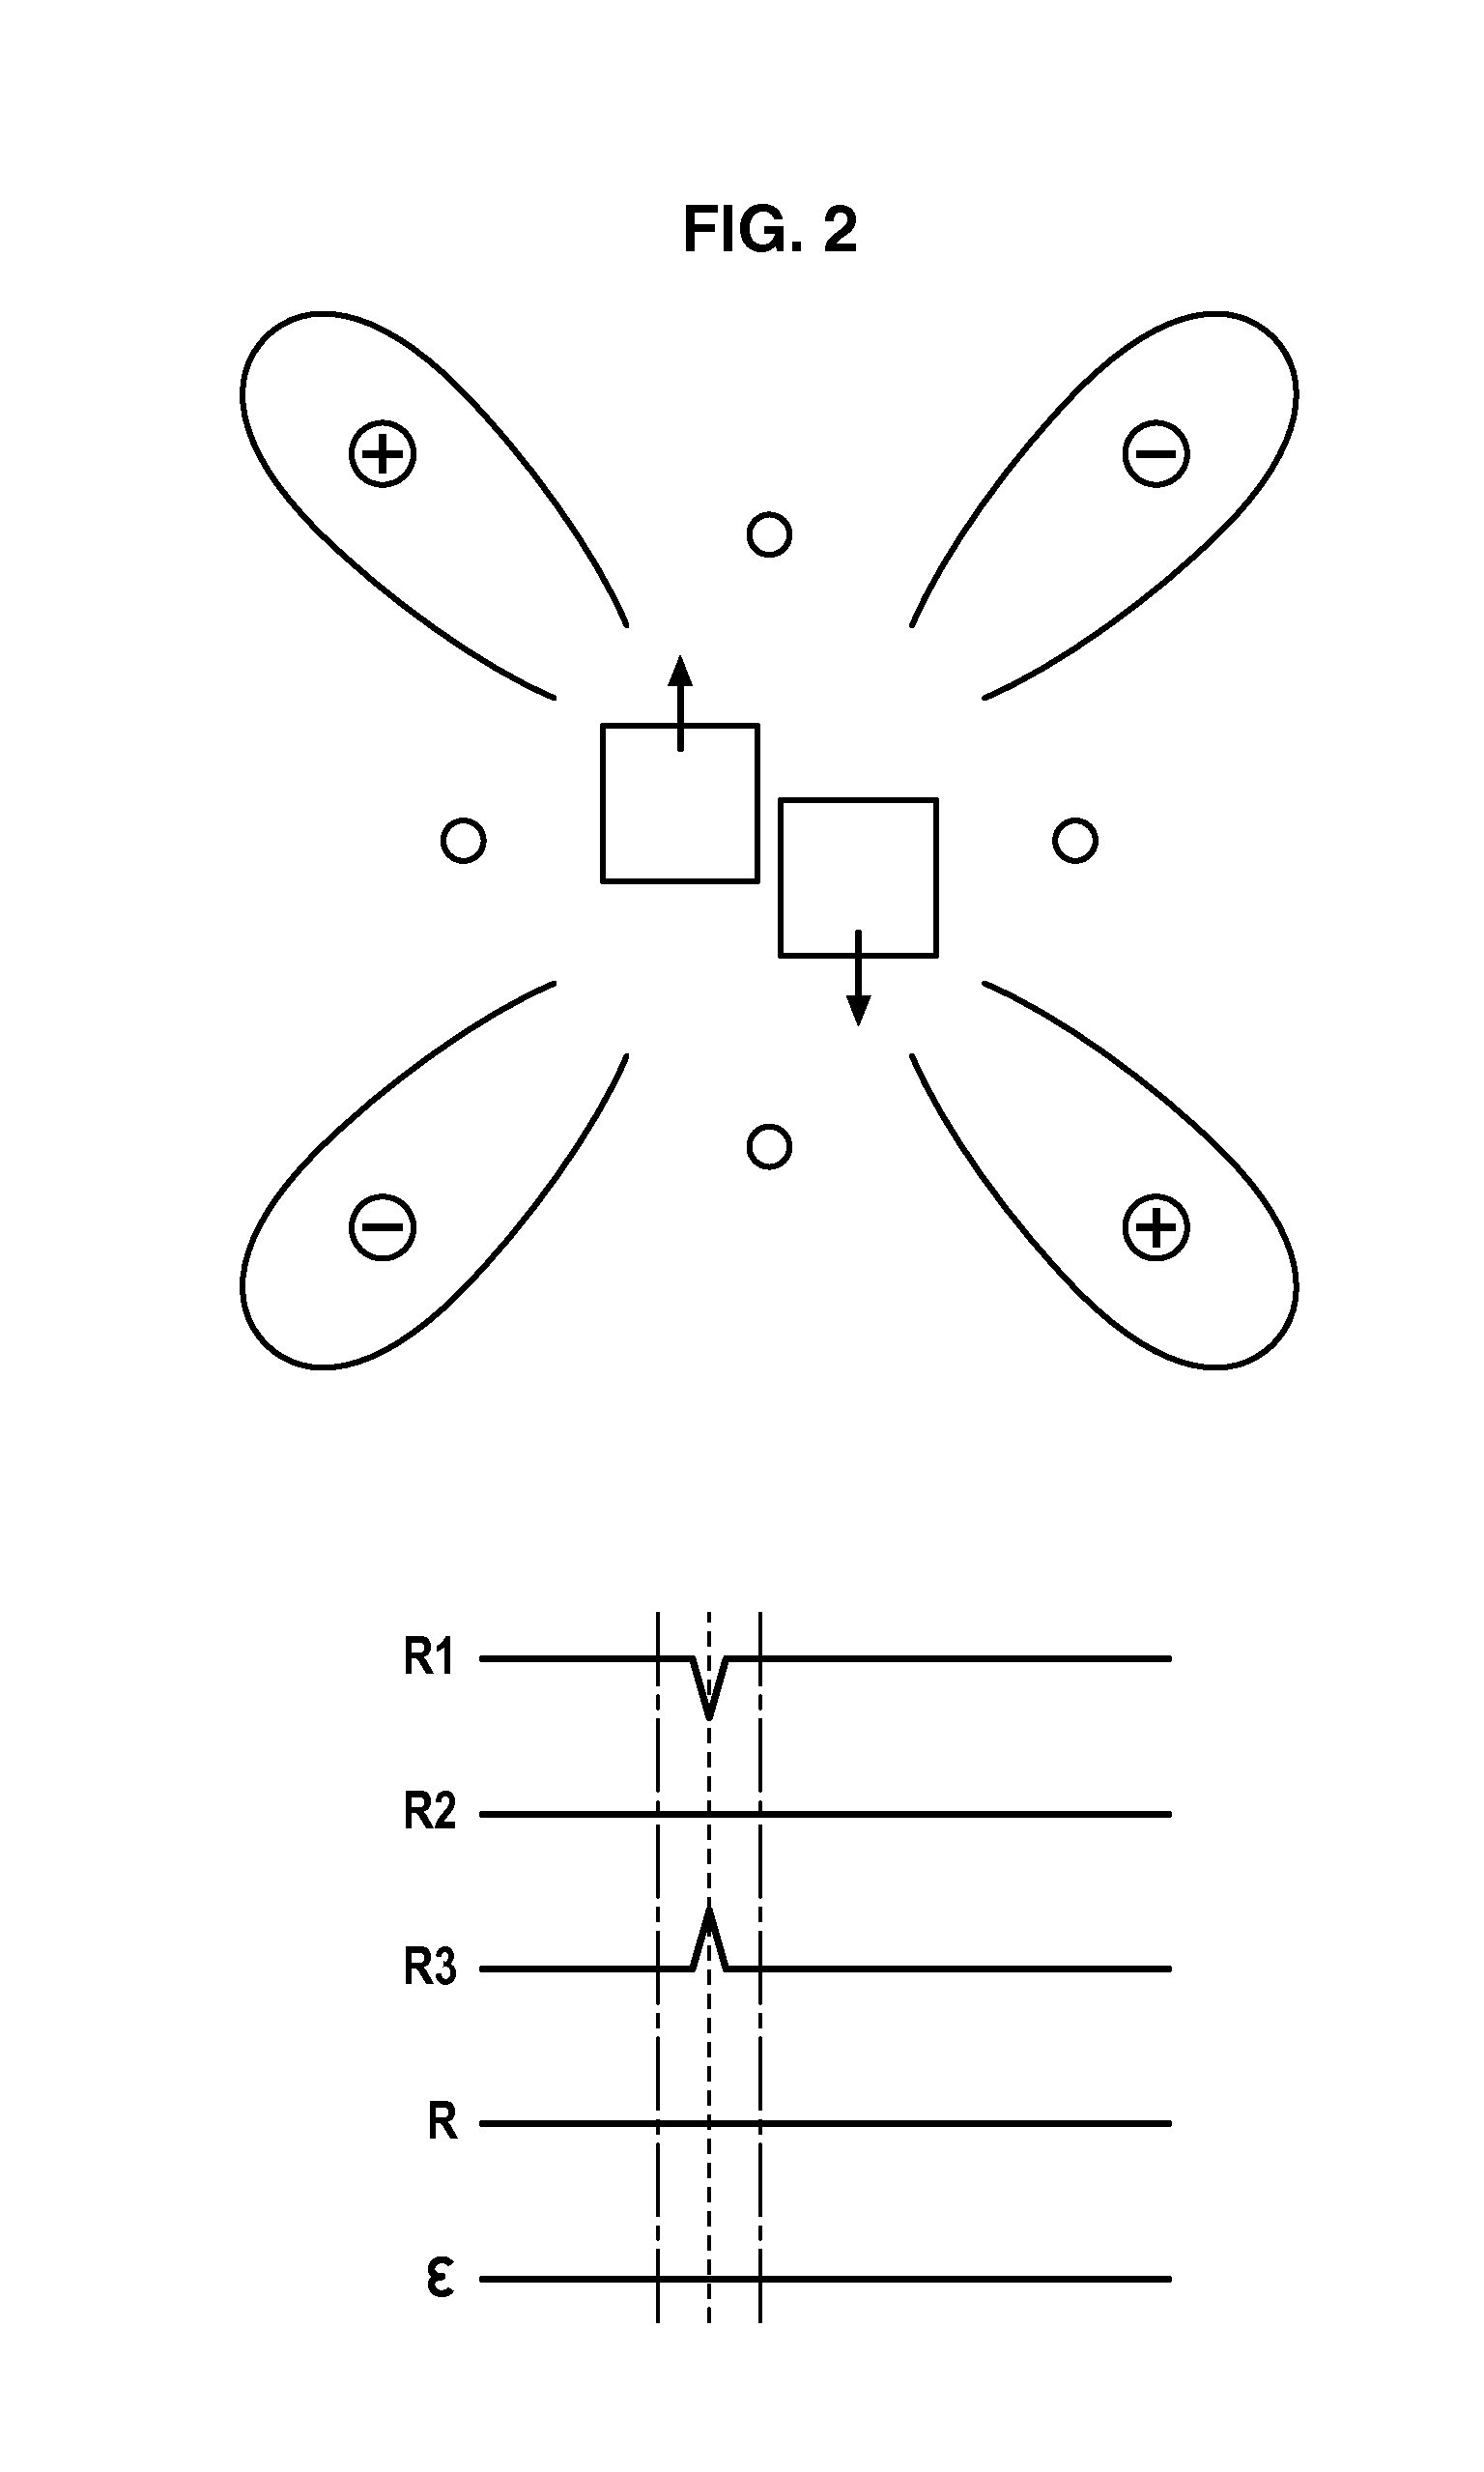 Passive monitoring method for seismic events